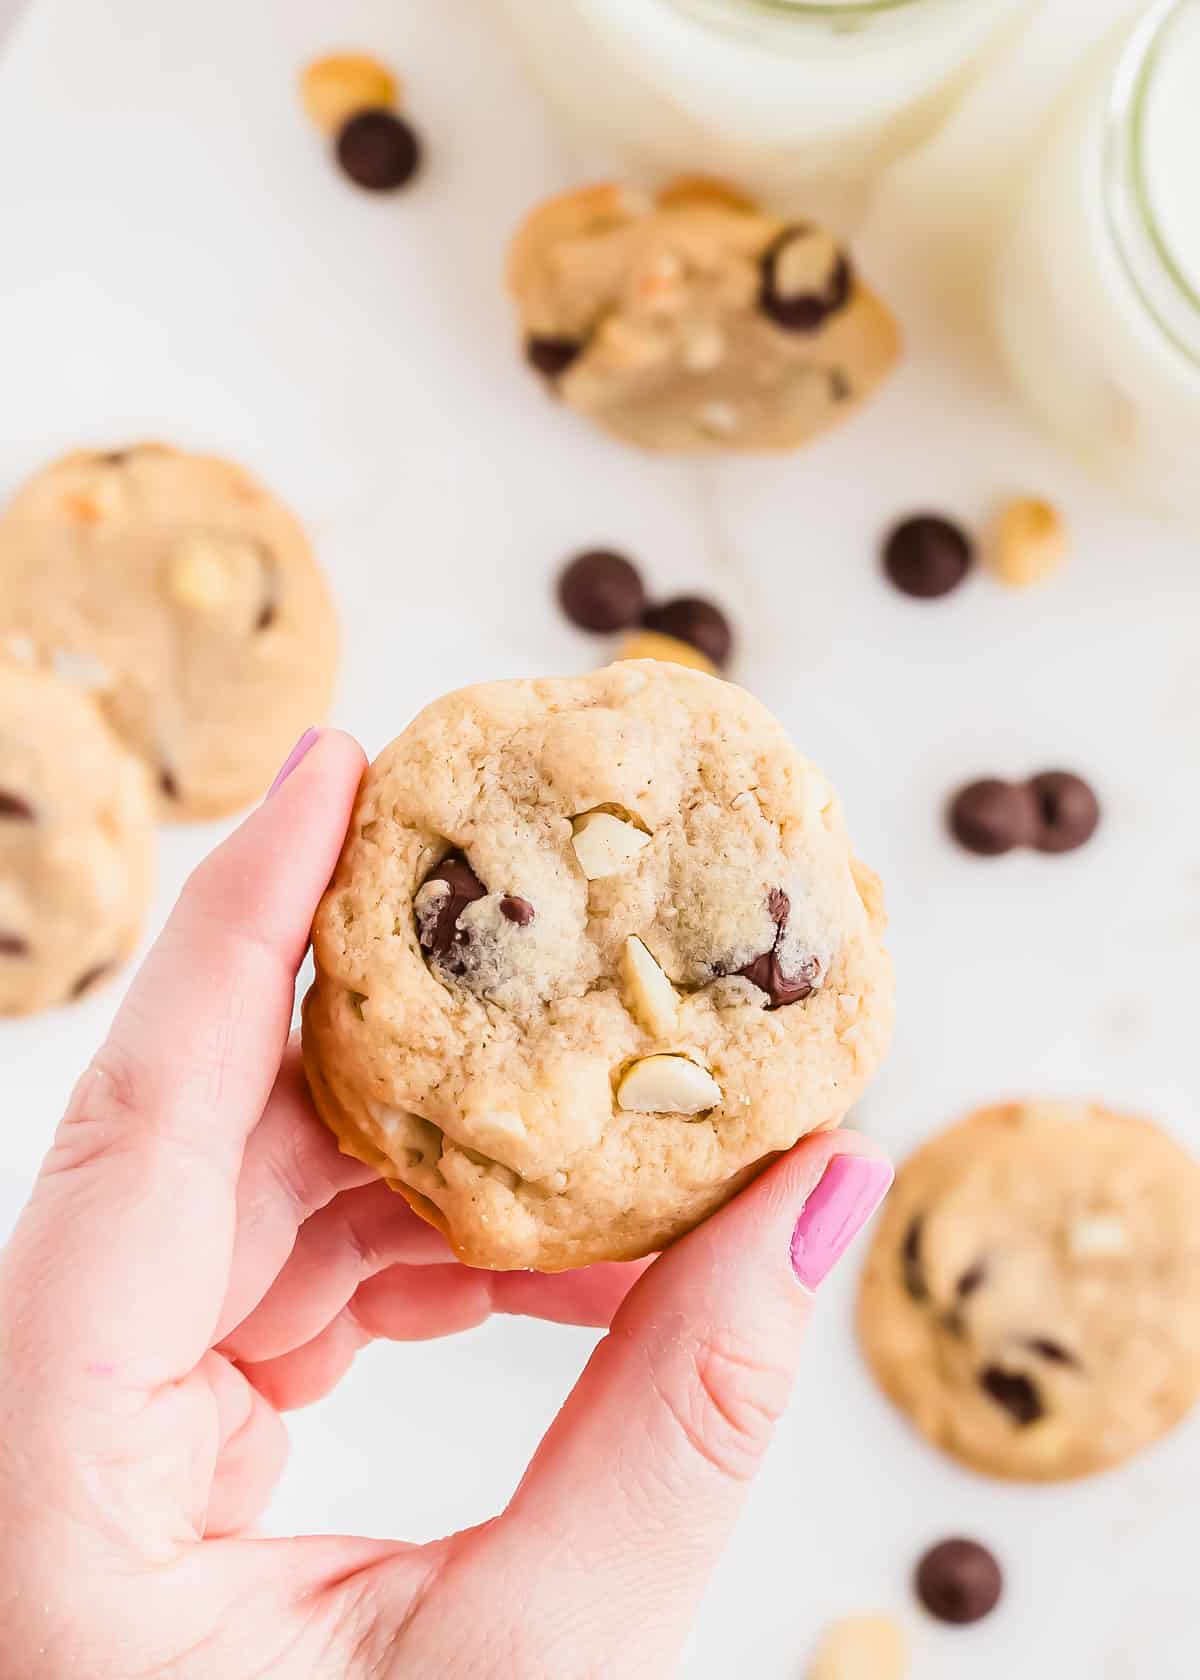 A hand holding a chocolate chip macadamia cookie.